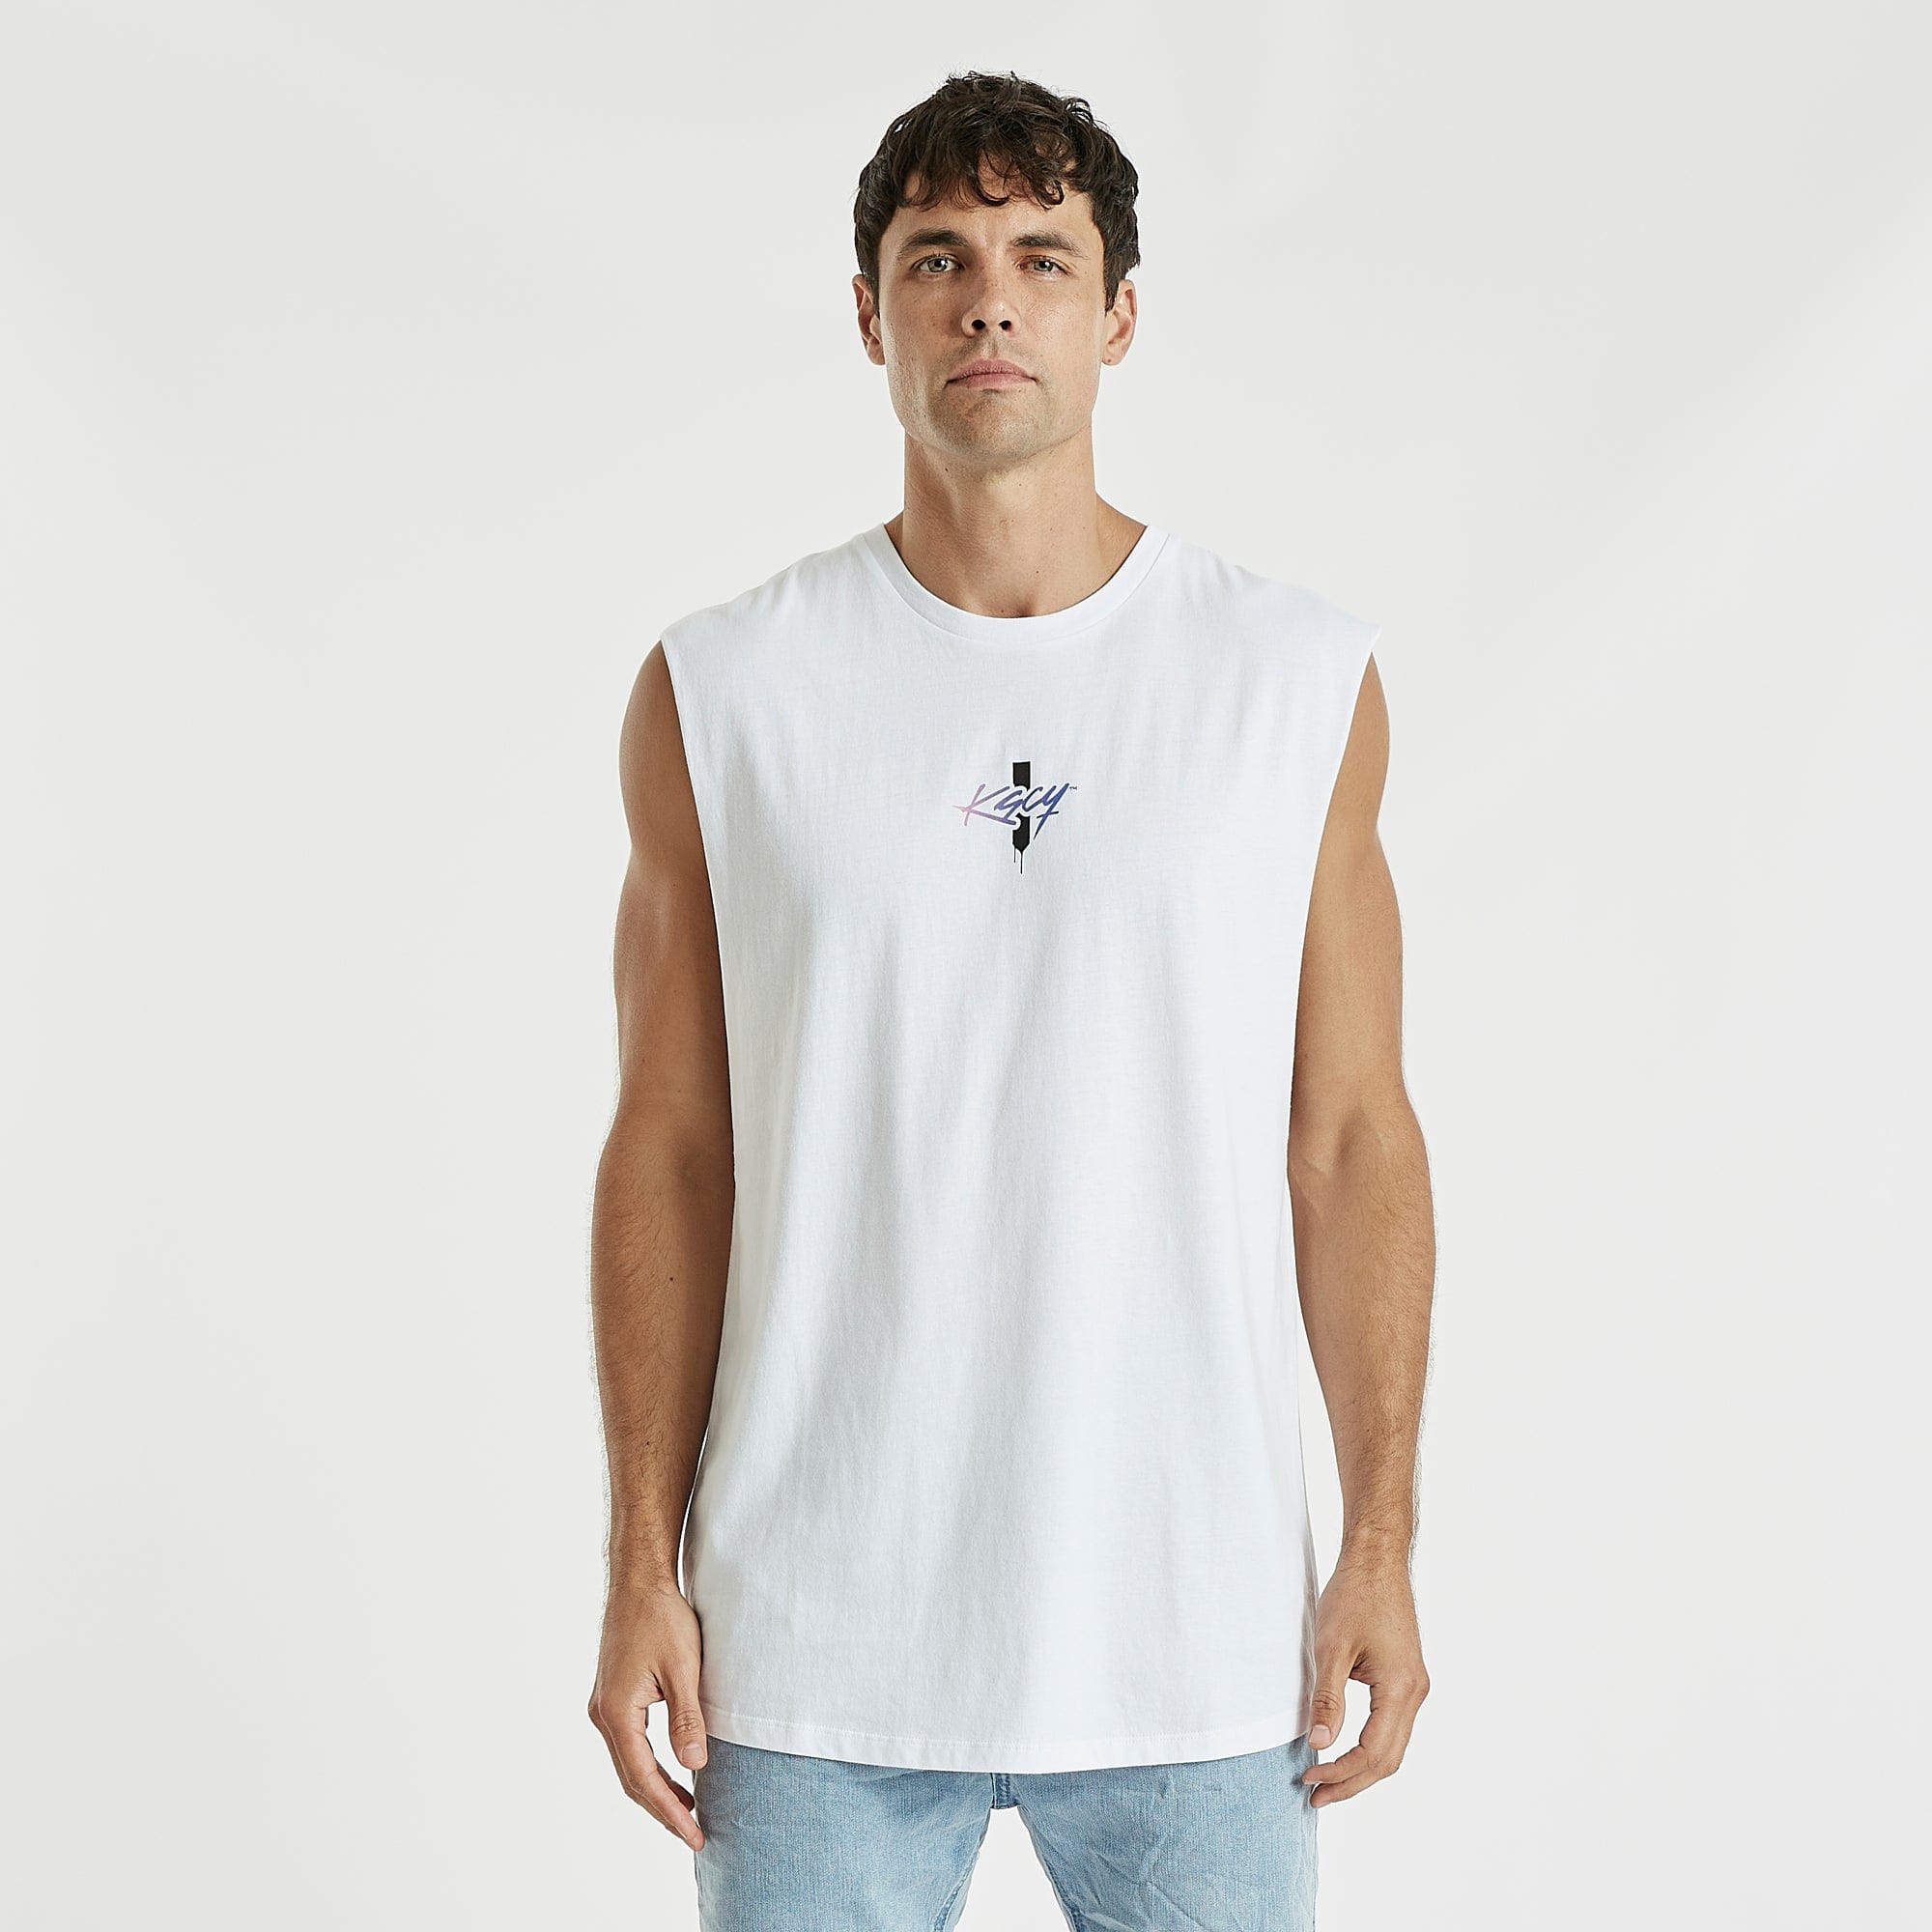 Misfit Dual Curved Muscle Tee White